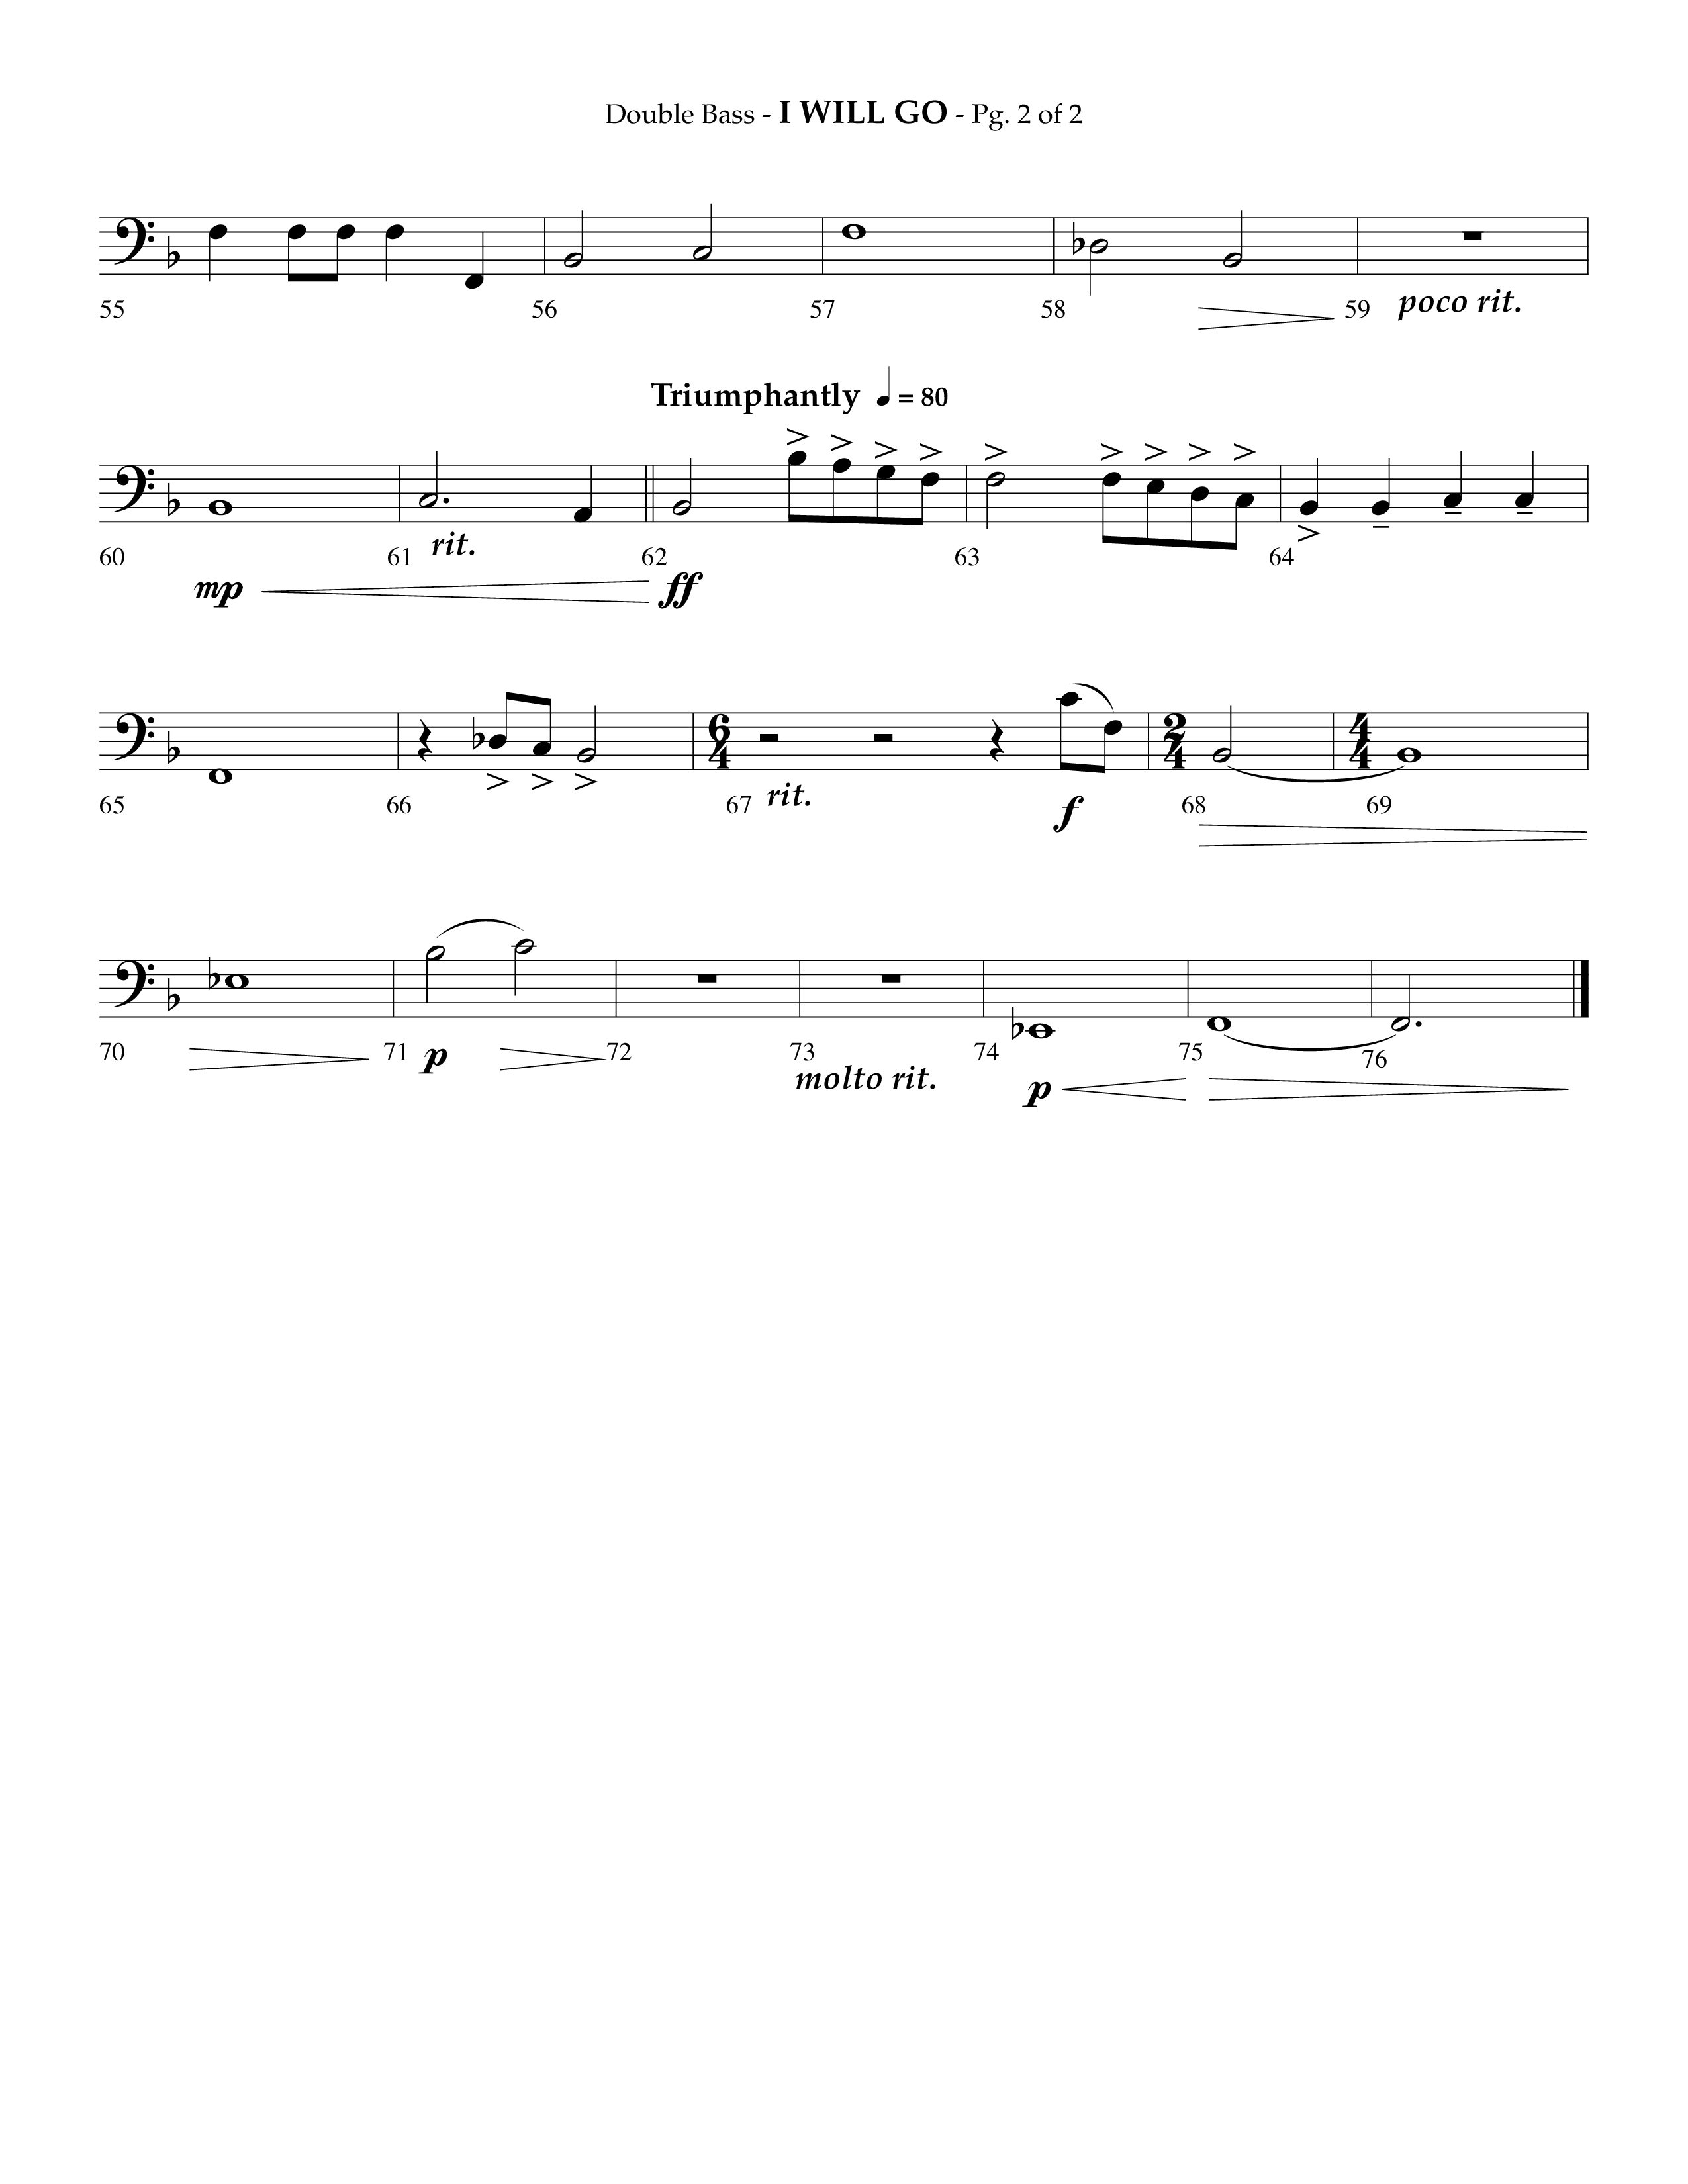 i Will Go (Choral Anthem SATB) Double Bass (Lifeway Choral / Arr. Phillip Keveren)